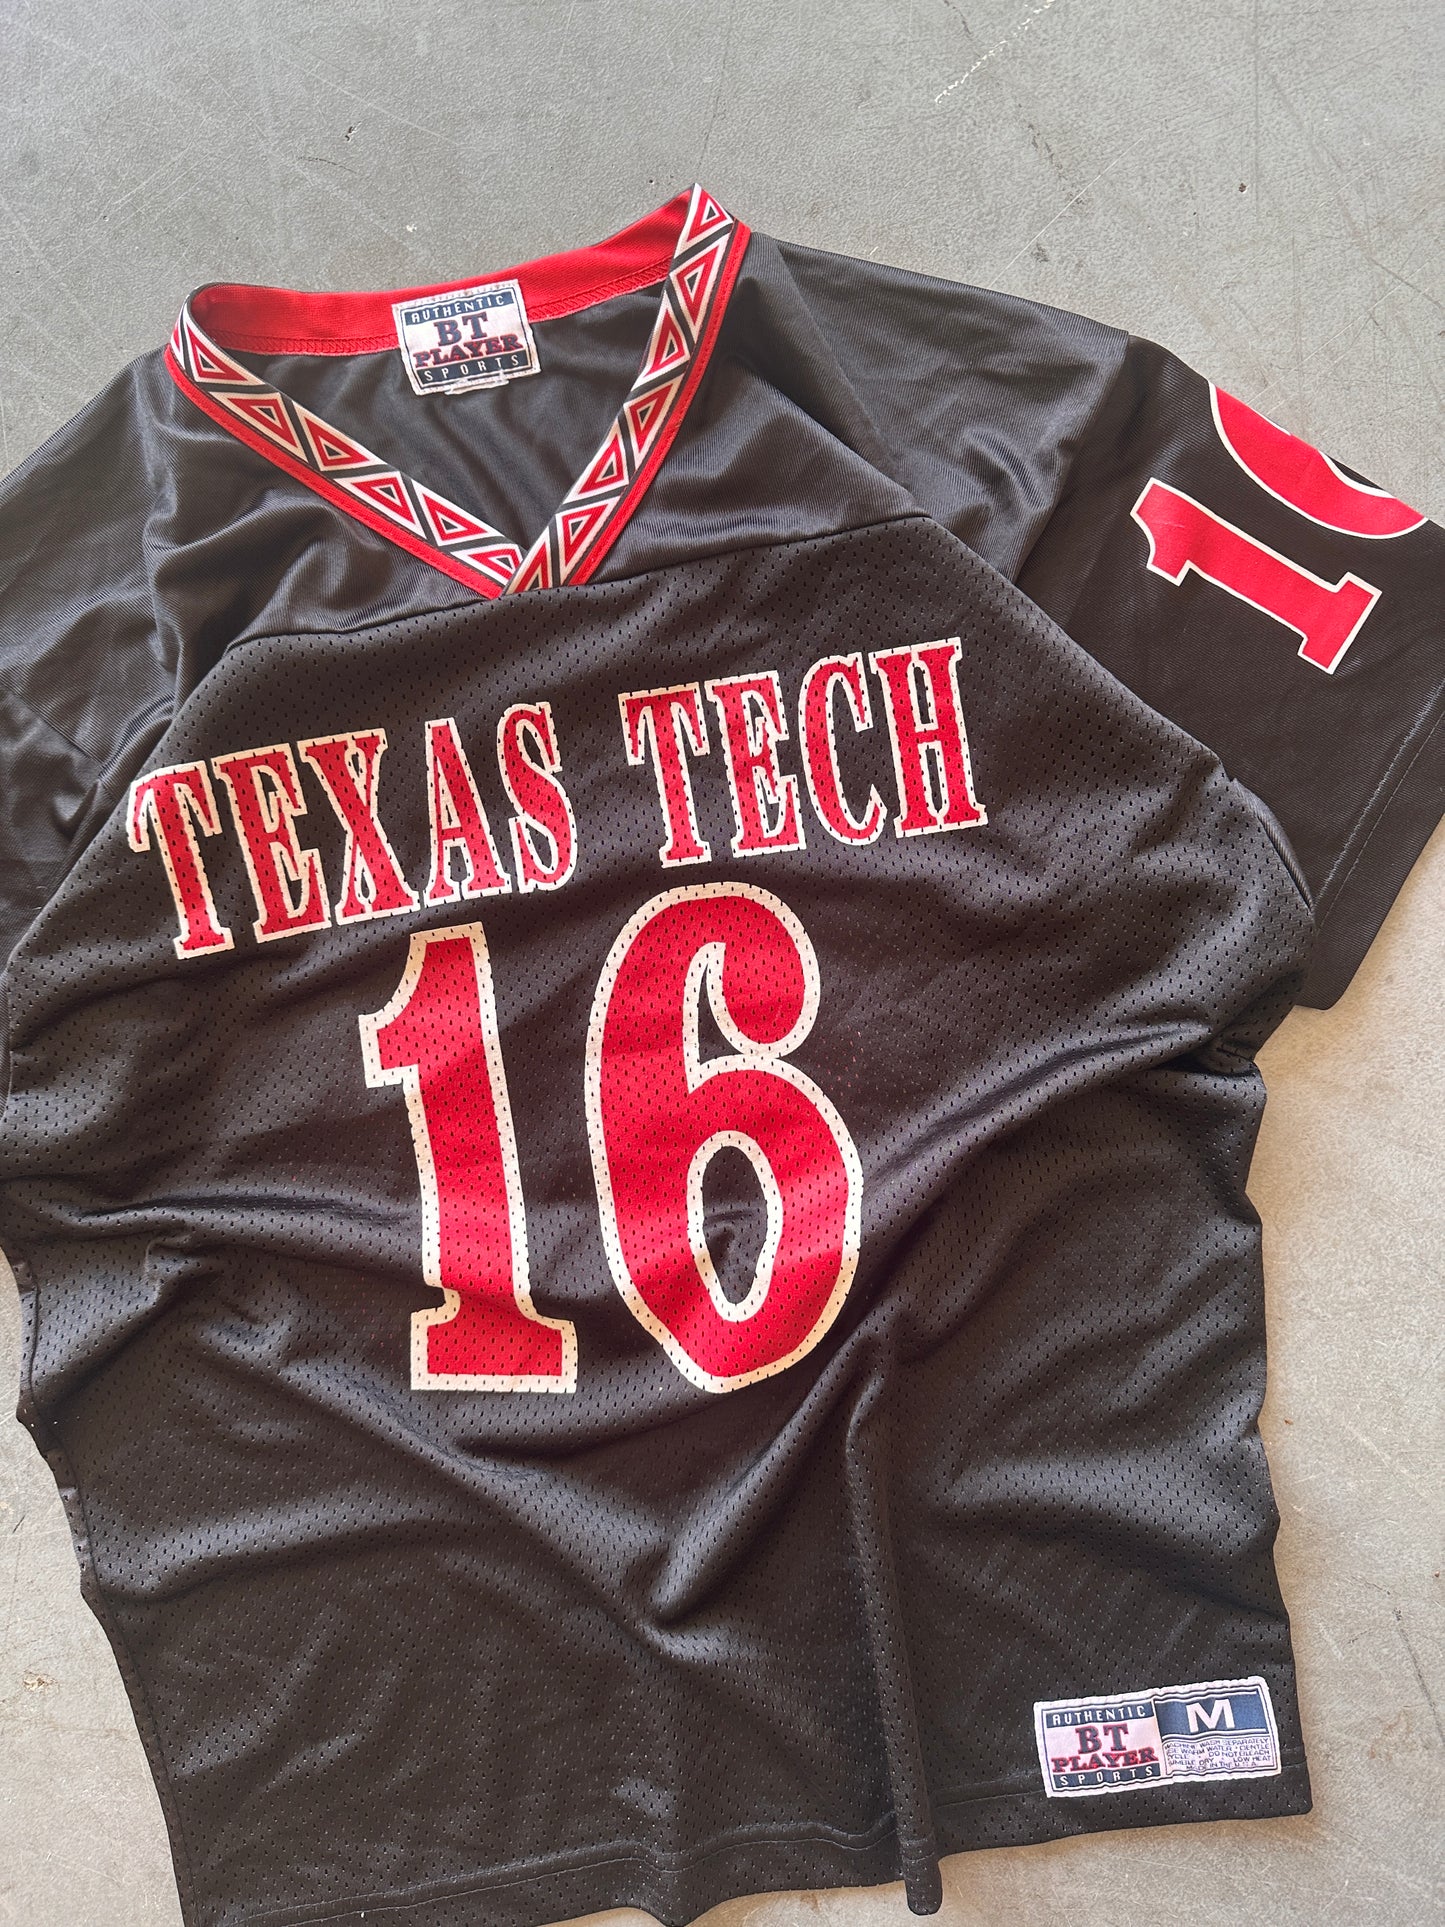 Texas Tech Red Raiders Jersey Size L